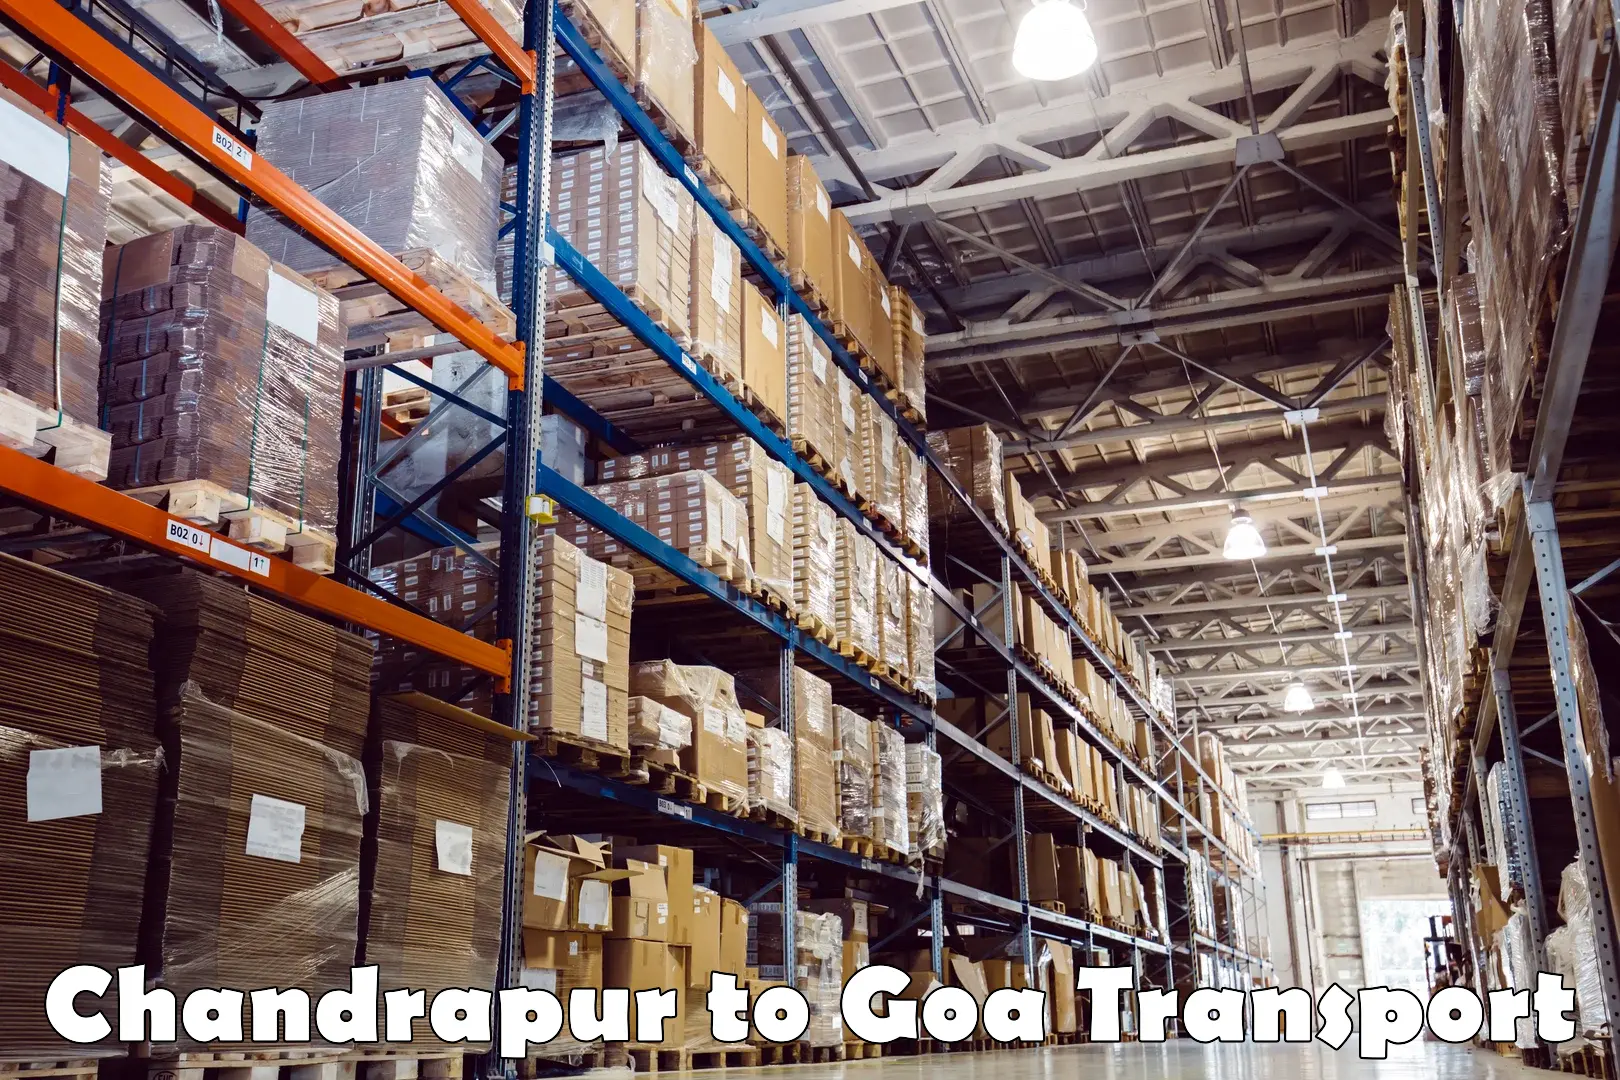 Transport bike from one state to another Chandrapur to Goa